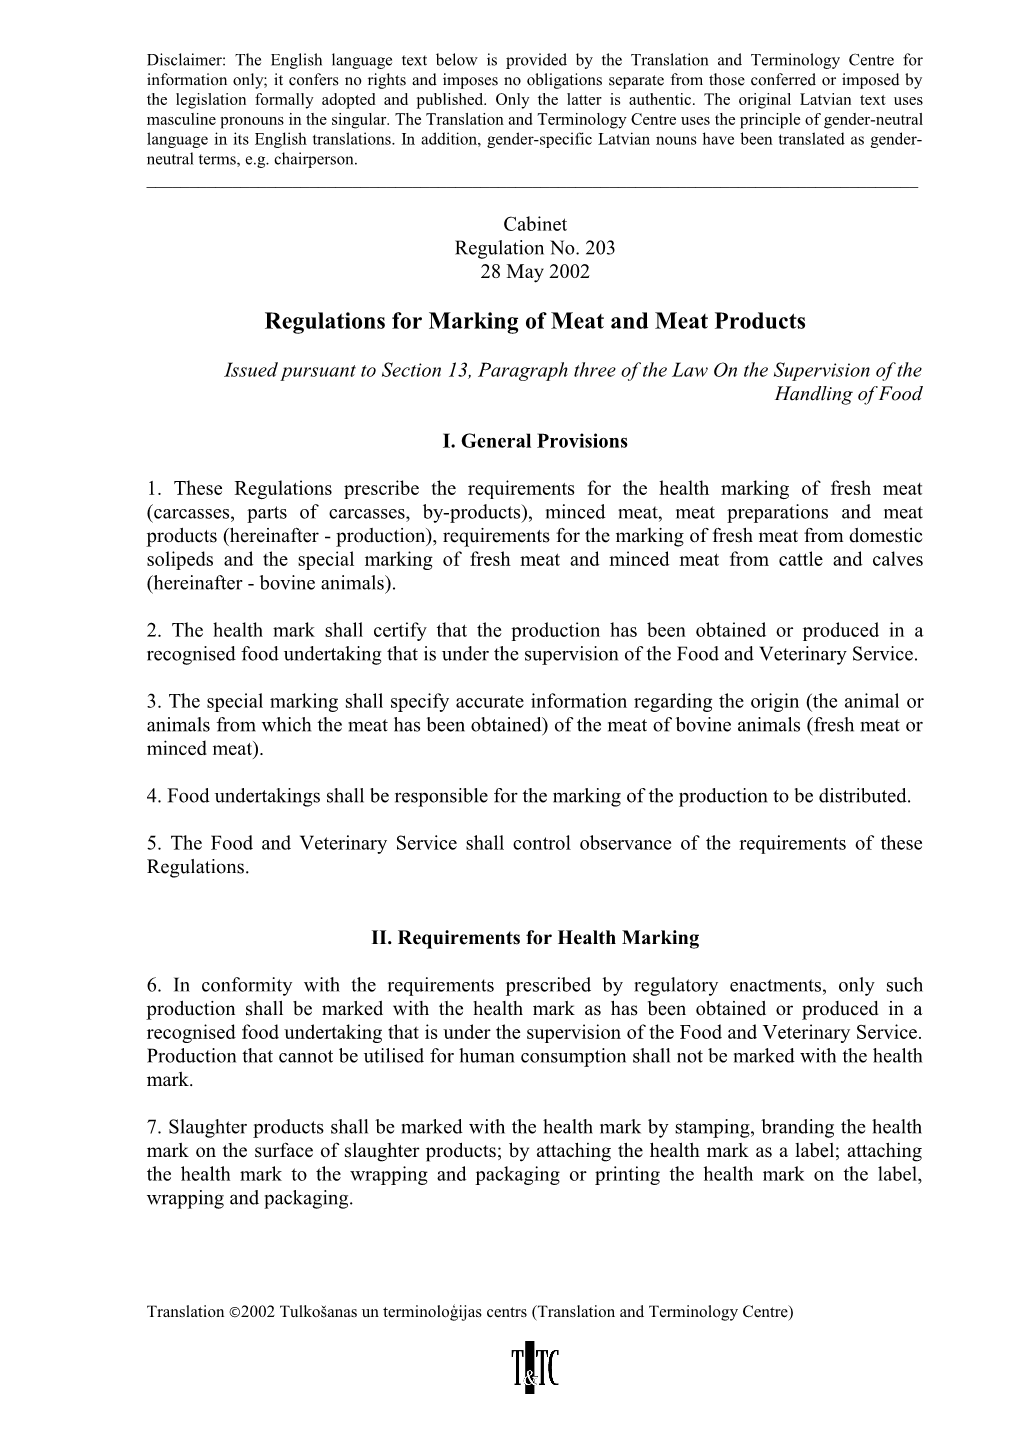 Regulations for Marking of Meat and Meat Products